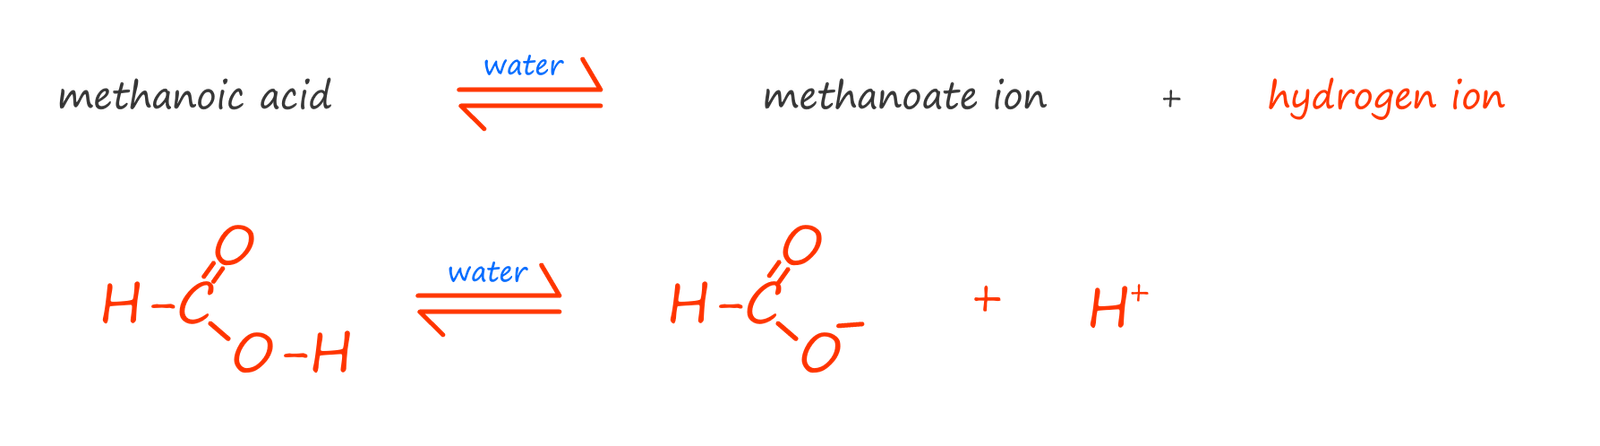 Dissociation of methanoic acid to form methanoate ions and hydrogen ions